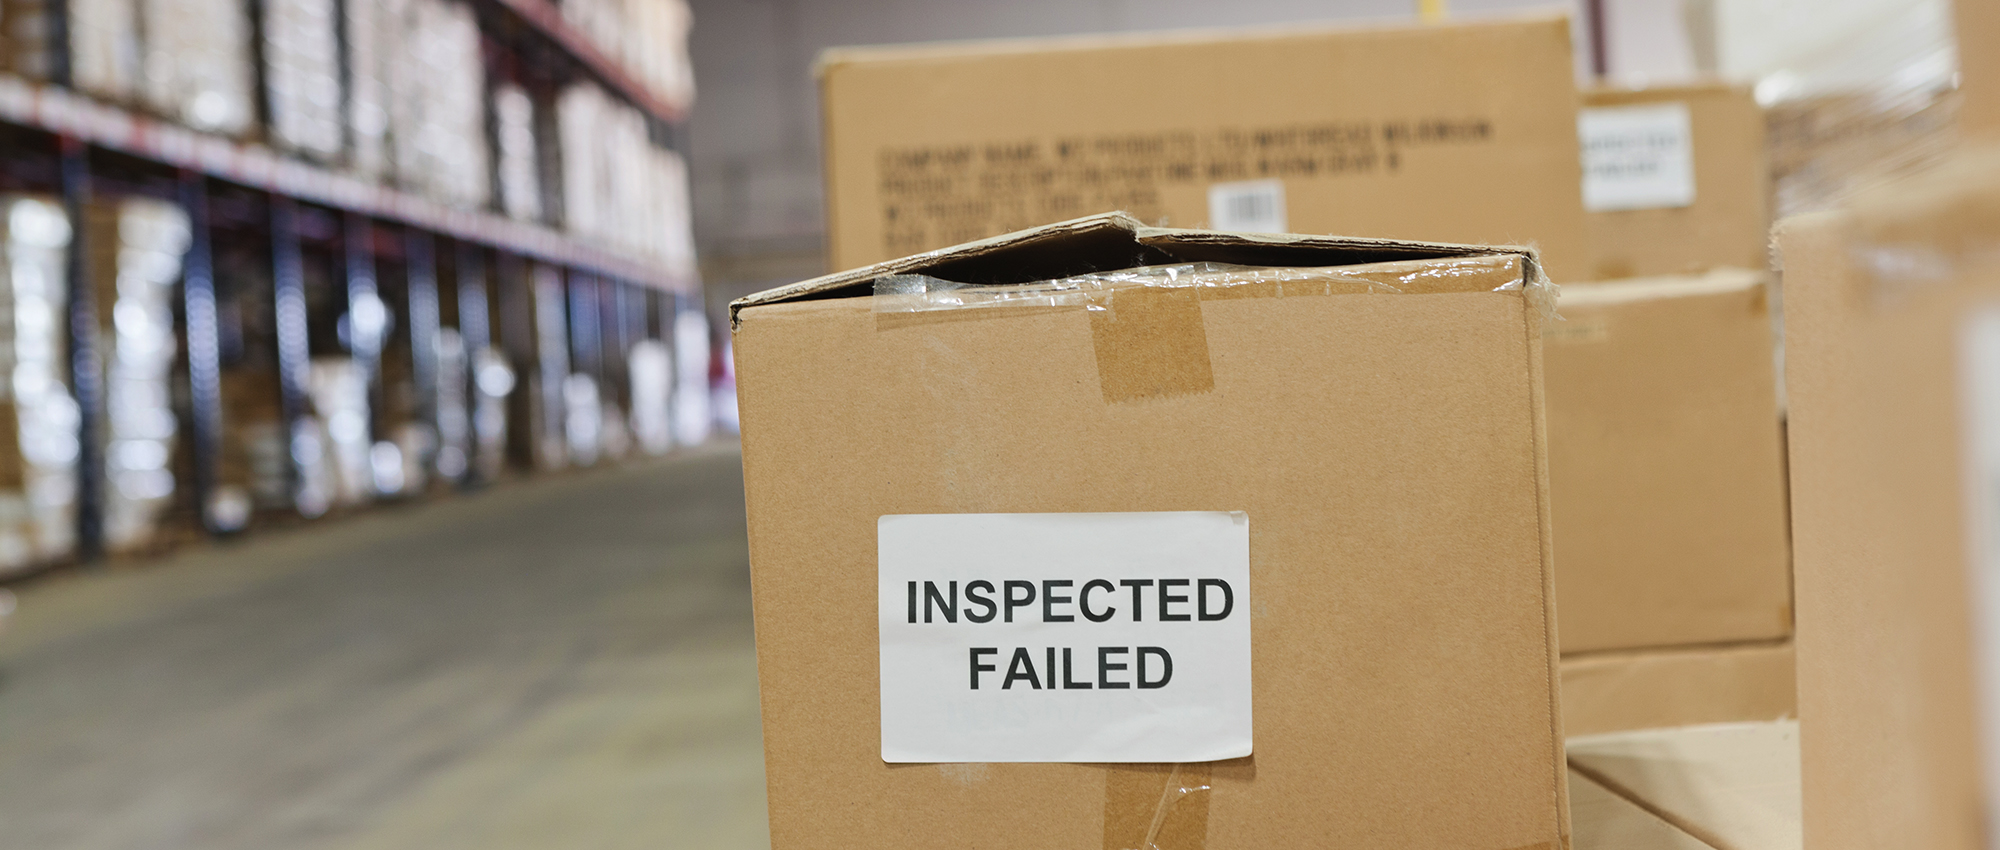 Inspected and failed boxed products are lined up on warehouse.